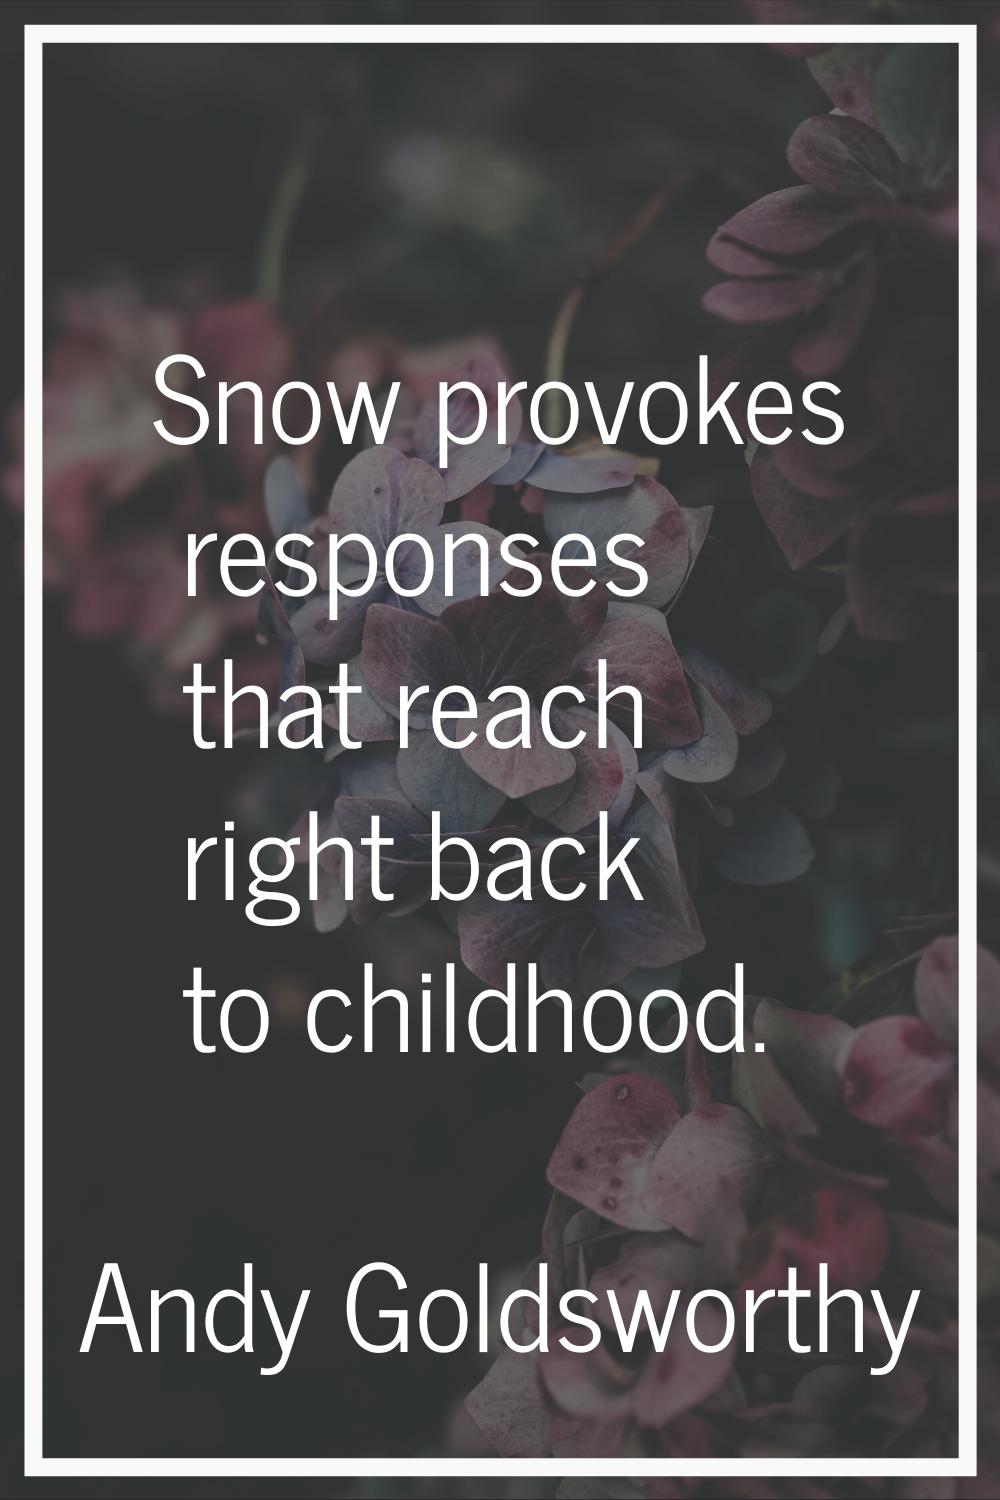 Snow provokes responses that reach right back to childhood.